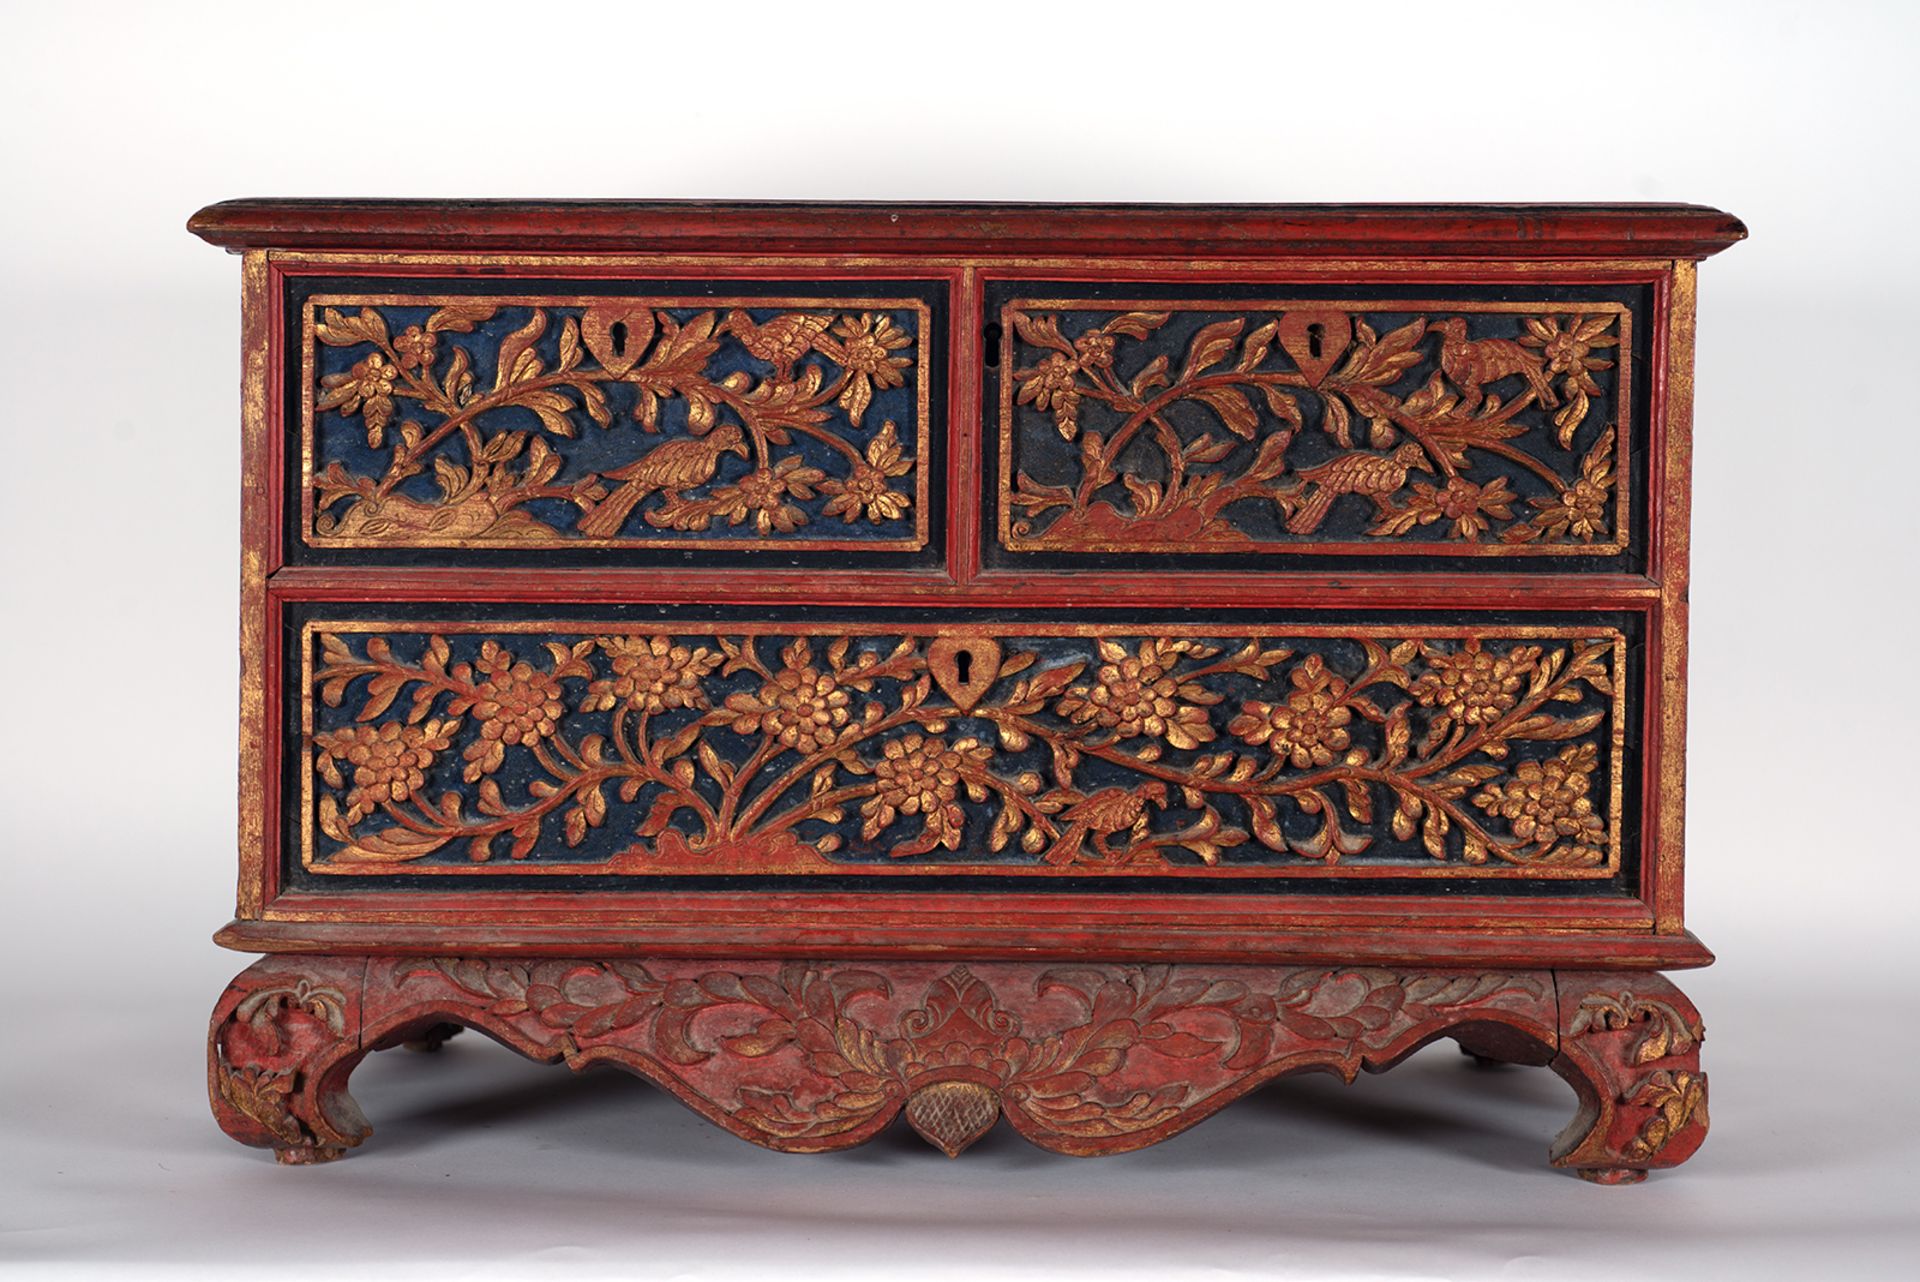 Important Mexican coffer, Viceroyalty of New Spain, 18th century